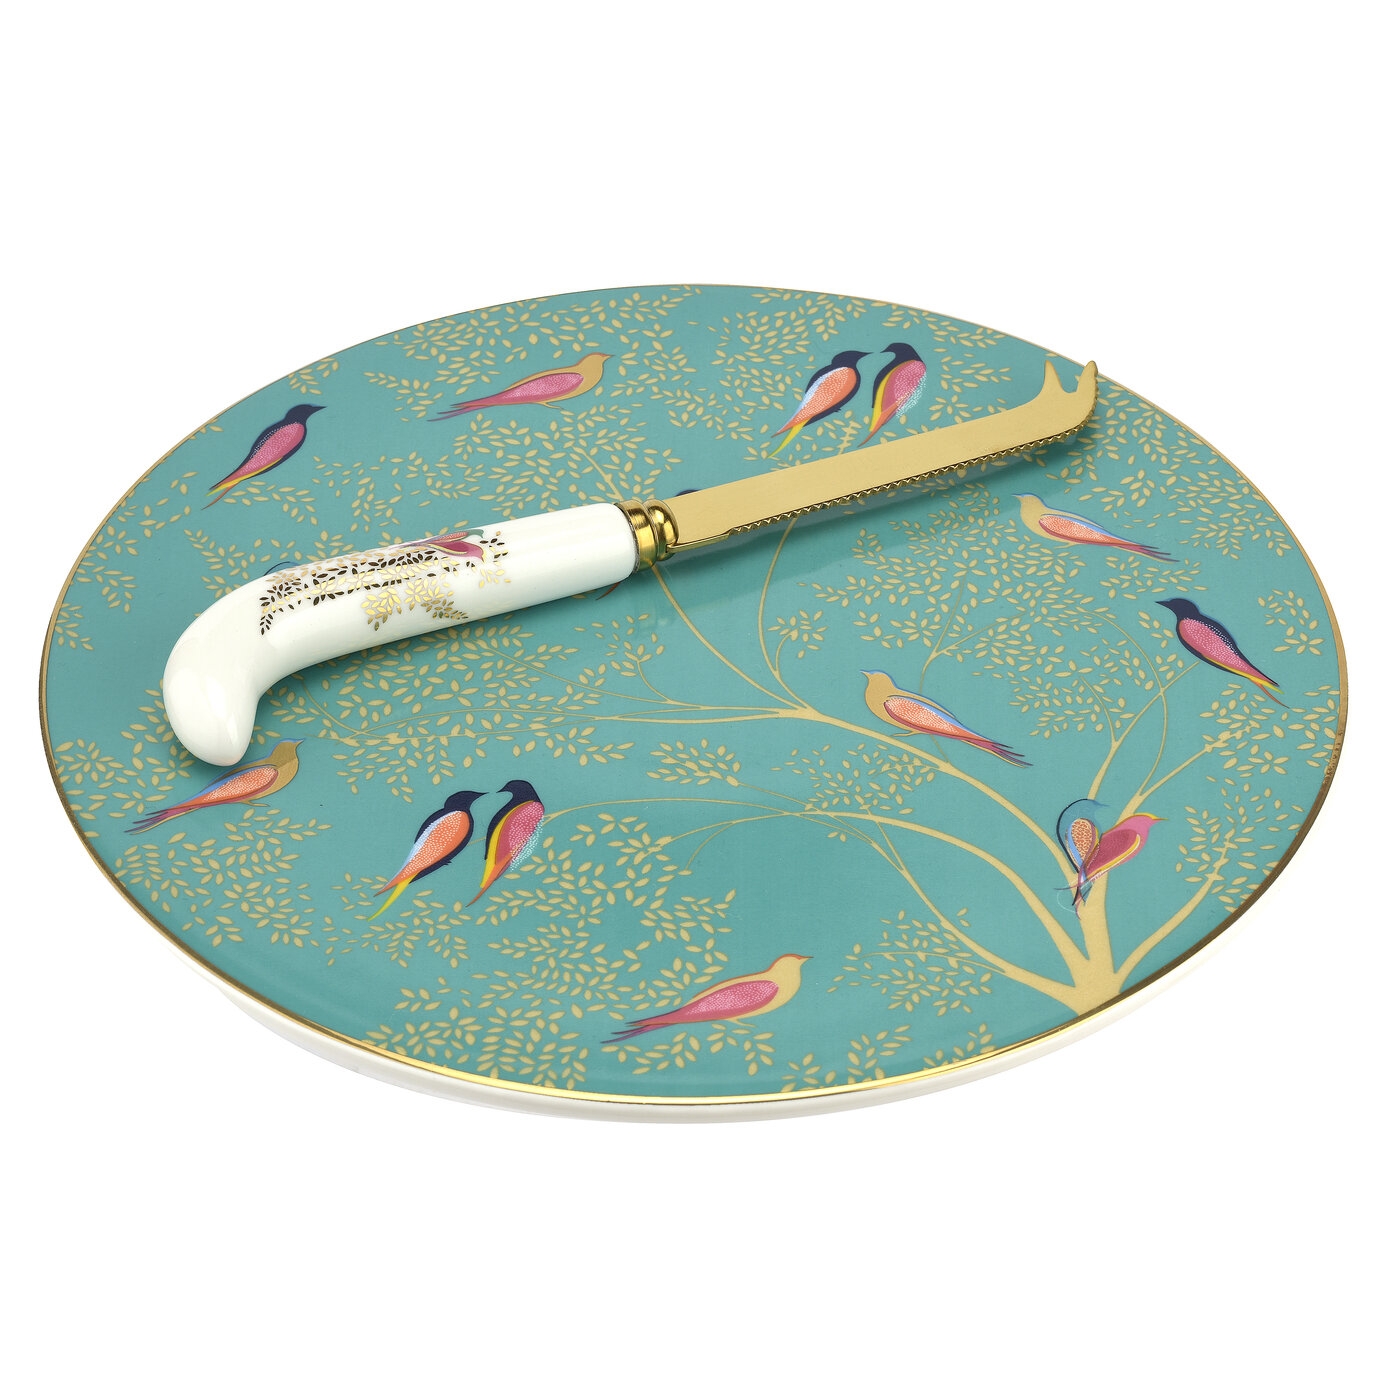 Sara Miller London Chelsea Cheese Plate with Knife (Green) image number null